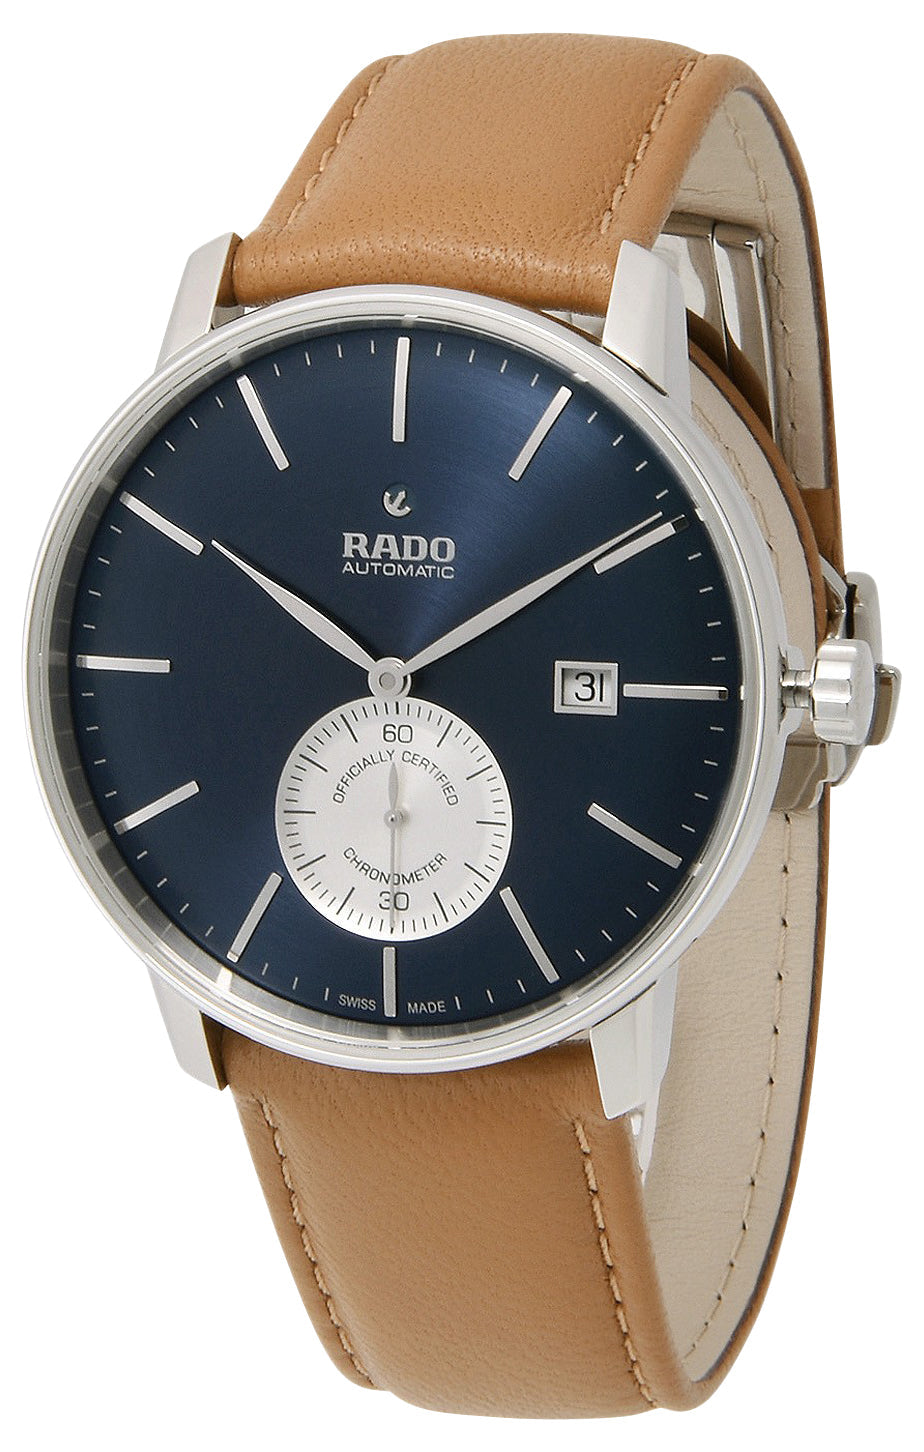 update alt-text with template Watches - Mens-Rado-R22880205-40 - 45 mm, blue, COSC, Coupole Classic, date, leather, mens, menswatches, new arrivals, Rado, round, rpSKU_5484-ST-20001, rpSKU_MP6907-SS002-111-1, rpSKU_MP6907-SS002-112-1, rpSKU_R14127152, rpSKU_R14129176, seconds sub-dial, stainless steel case, swiss automatic, watches-Watches & Beyond